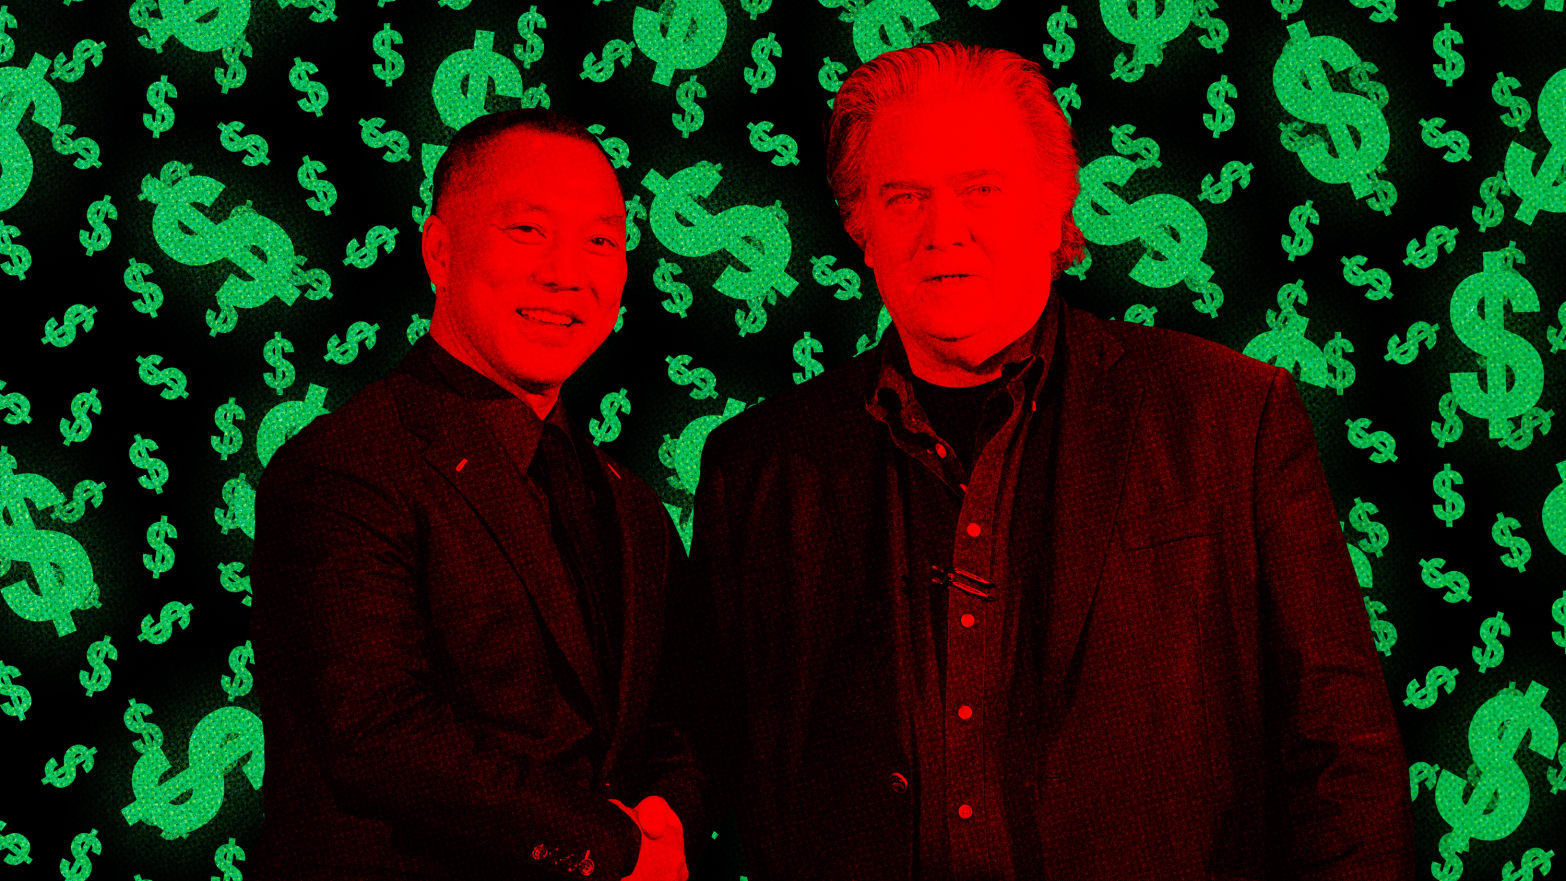 A photo illustration of Chinese mogul Guo Wengui and Steve Bannon and dollar signs.